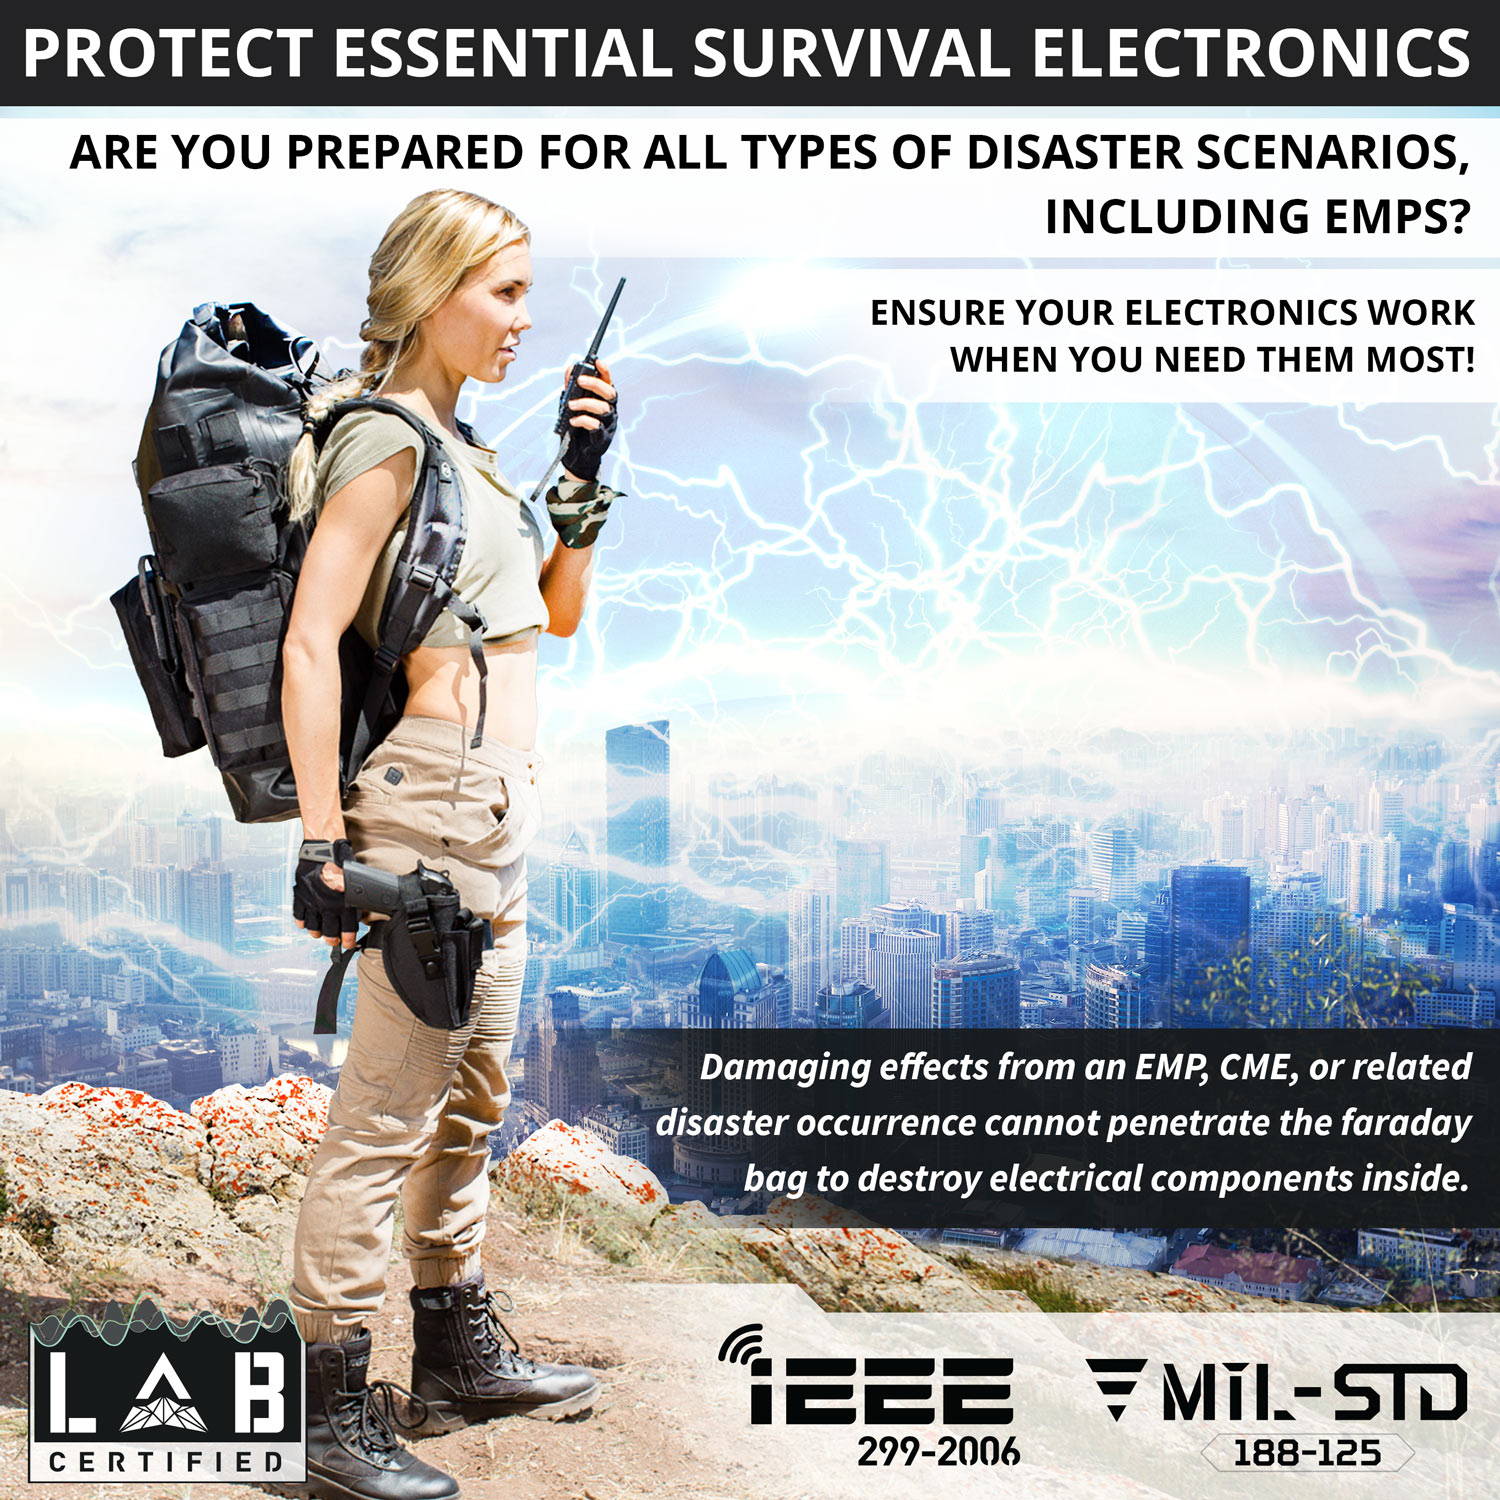 Mission Darkness Dry Shield Faraday Backpack 40L capacity protects electronics from EMP damage